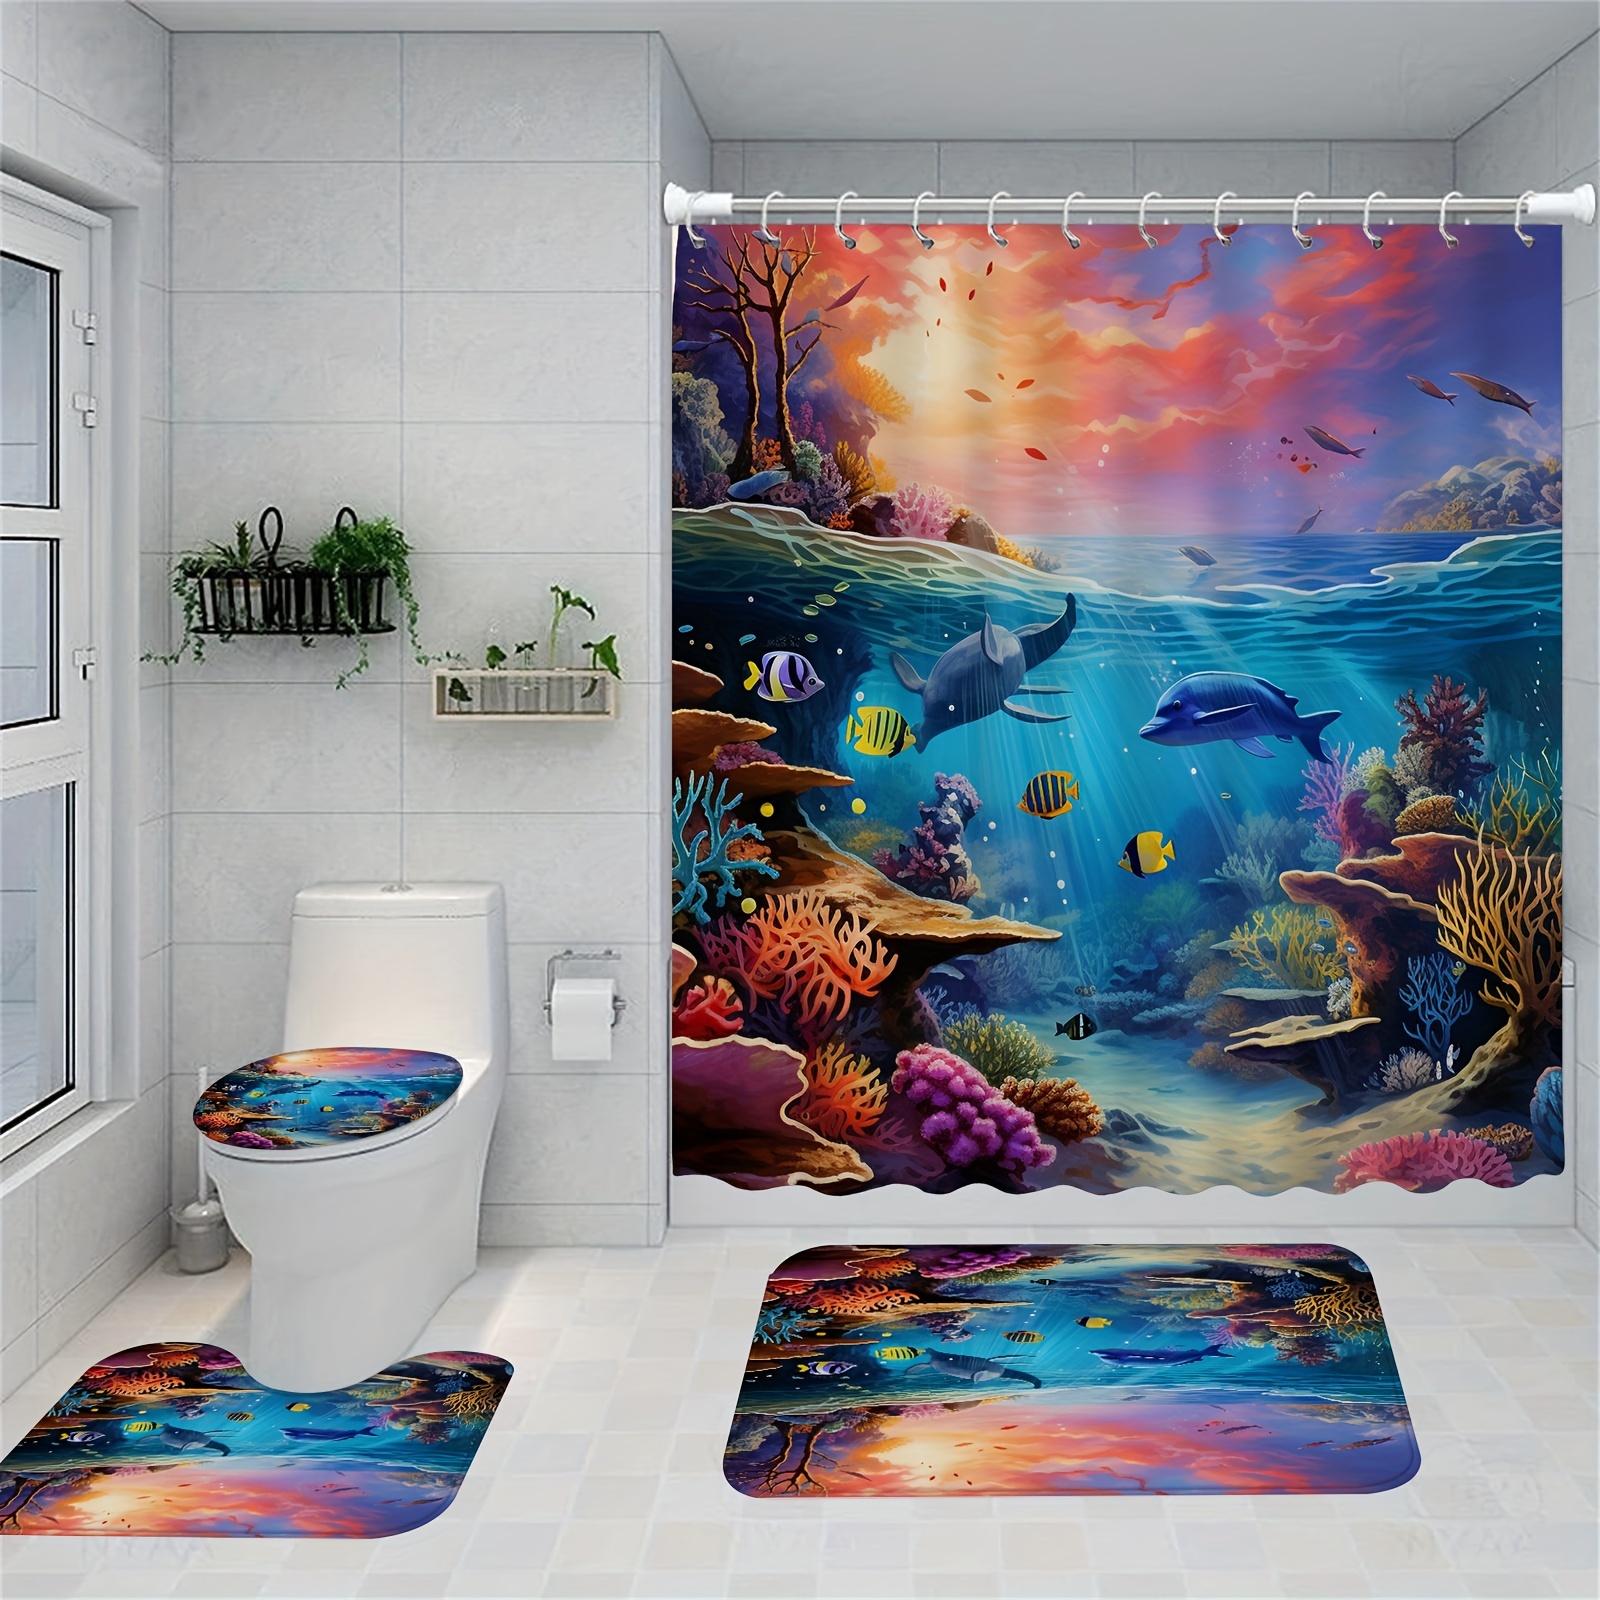 EREHome Underwater Scene Tropical Fish Shower Curtain And Hooks